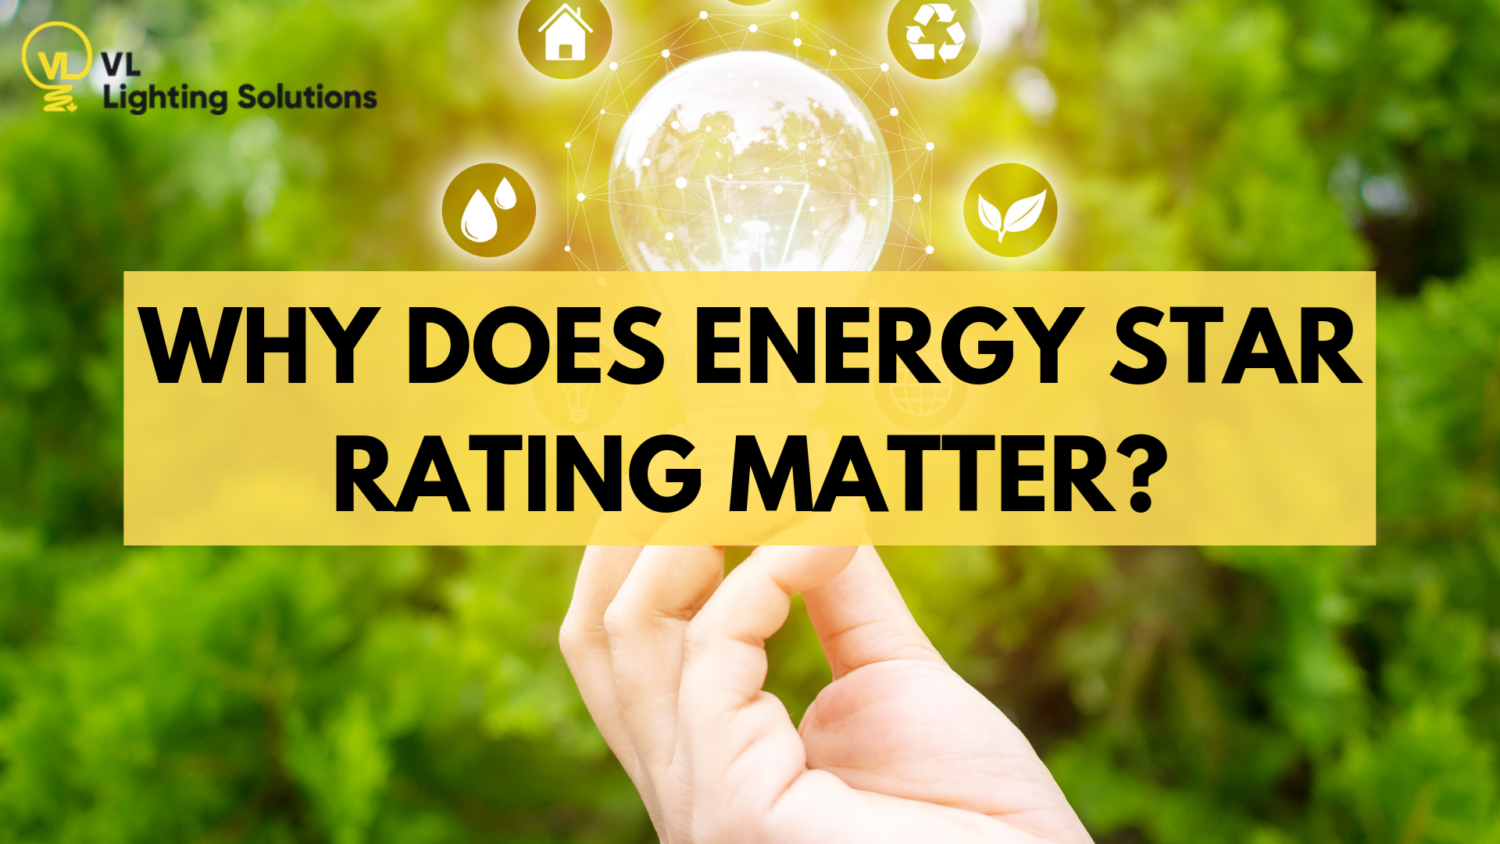 Why Does ENERGY STAR Rating Matter?